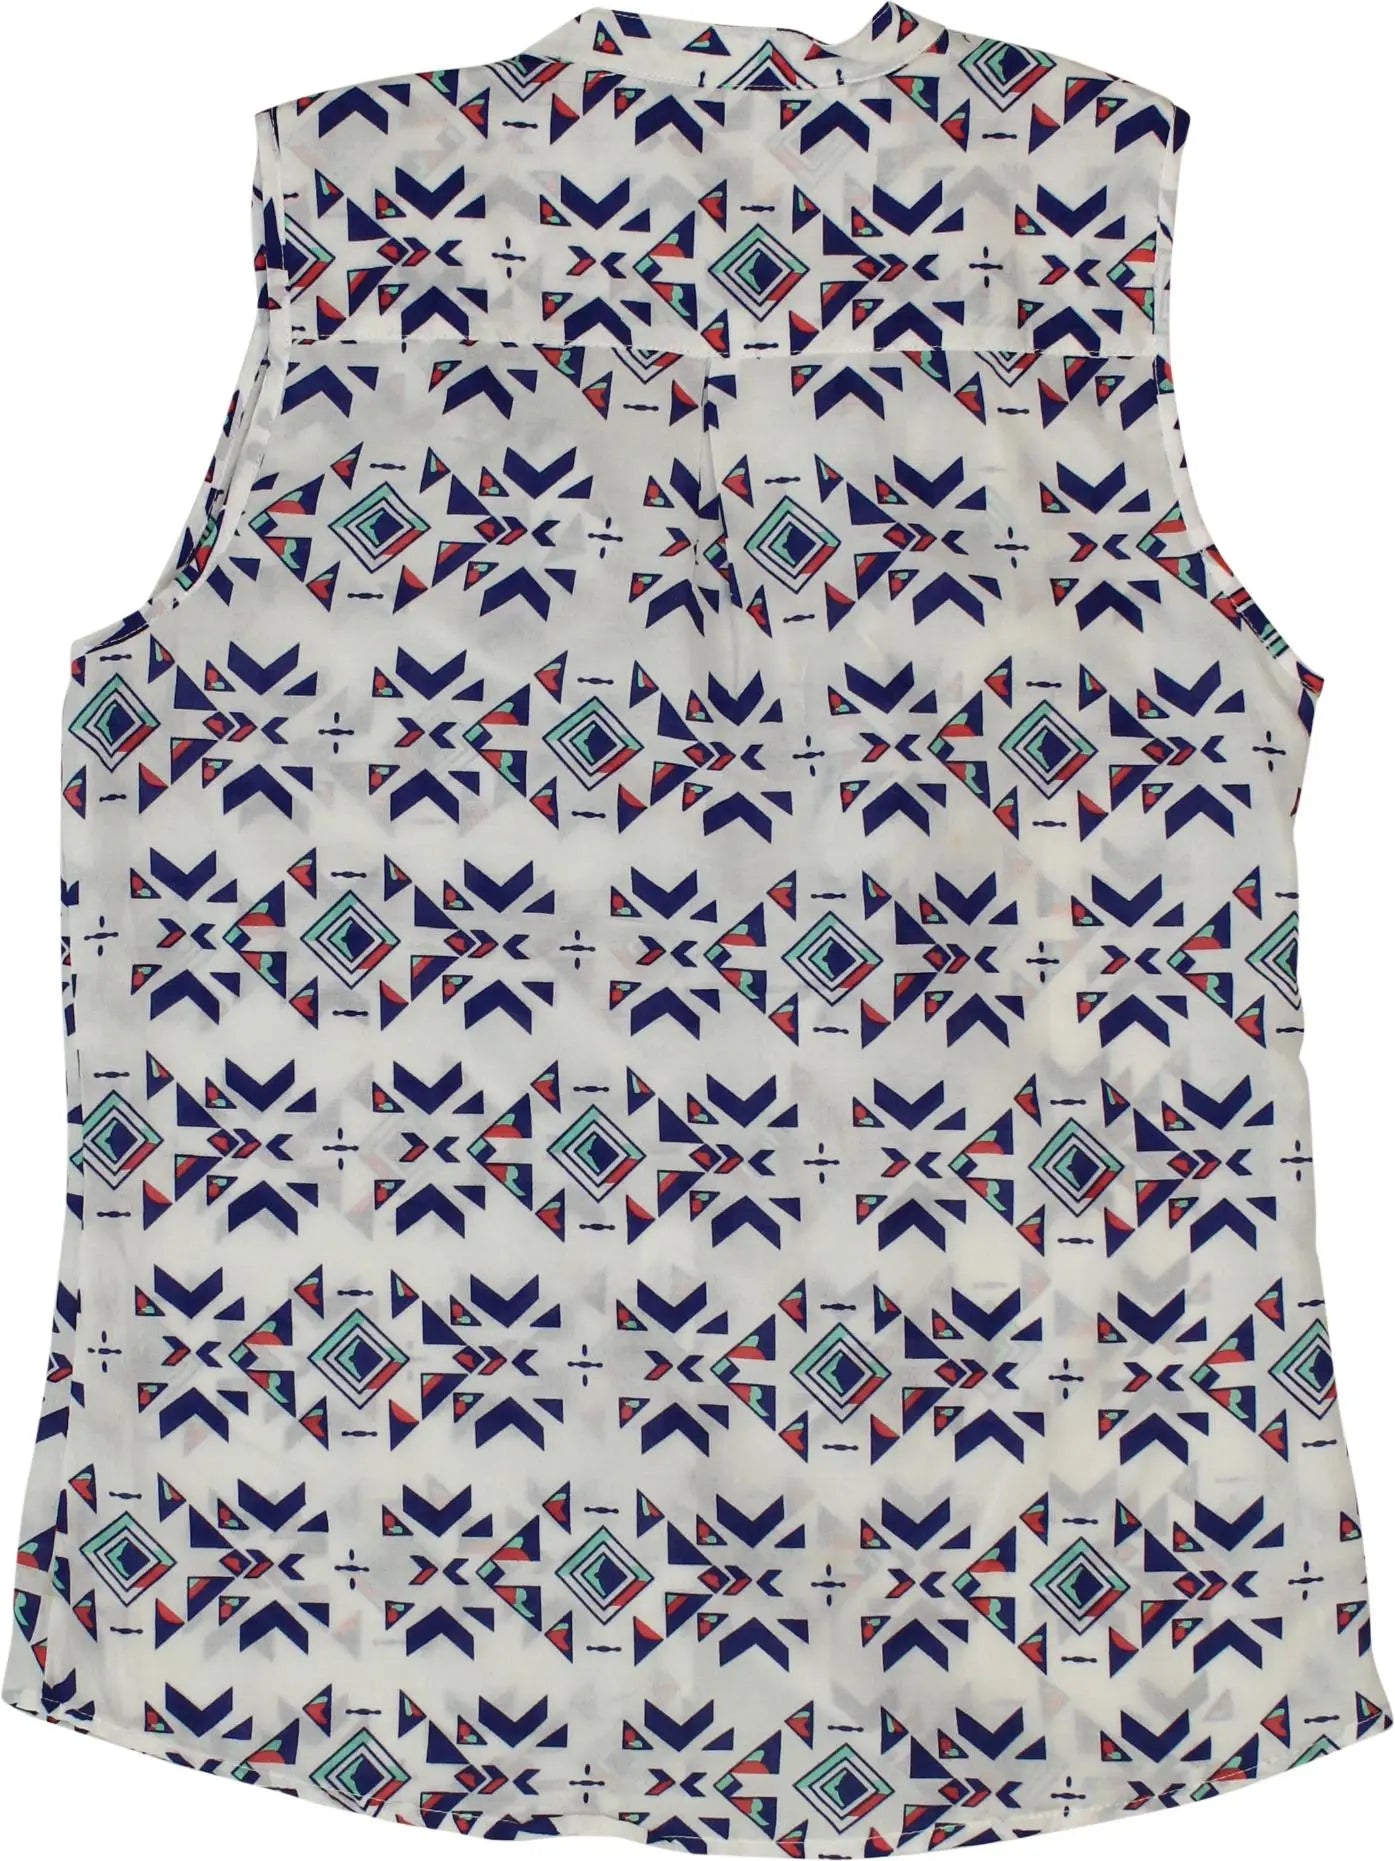 Musthave - Patterned Sleeveless Blouse- ThriftTale.com - Vintage and second handclothing